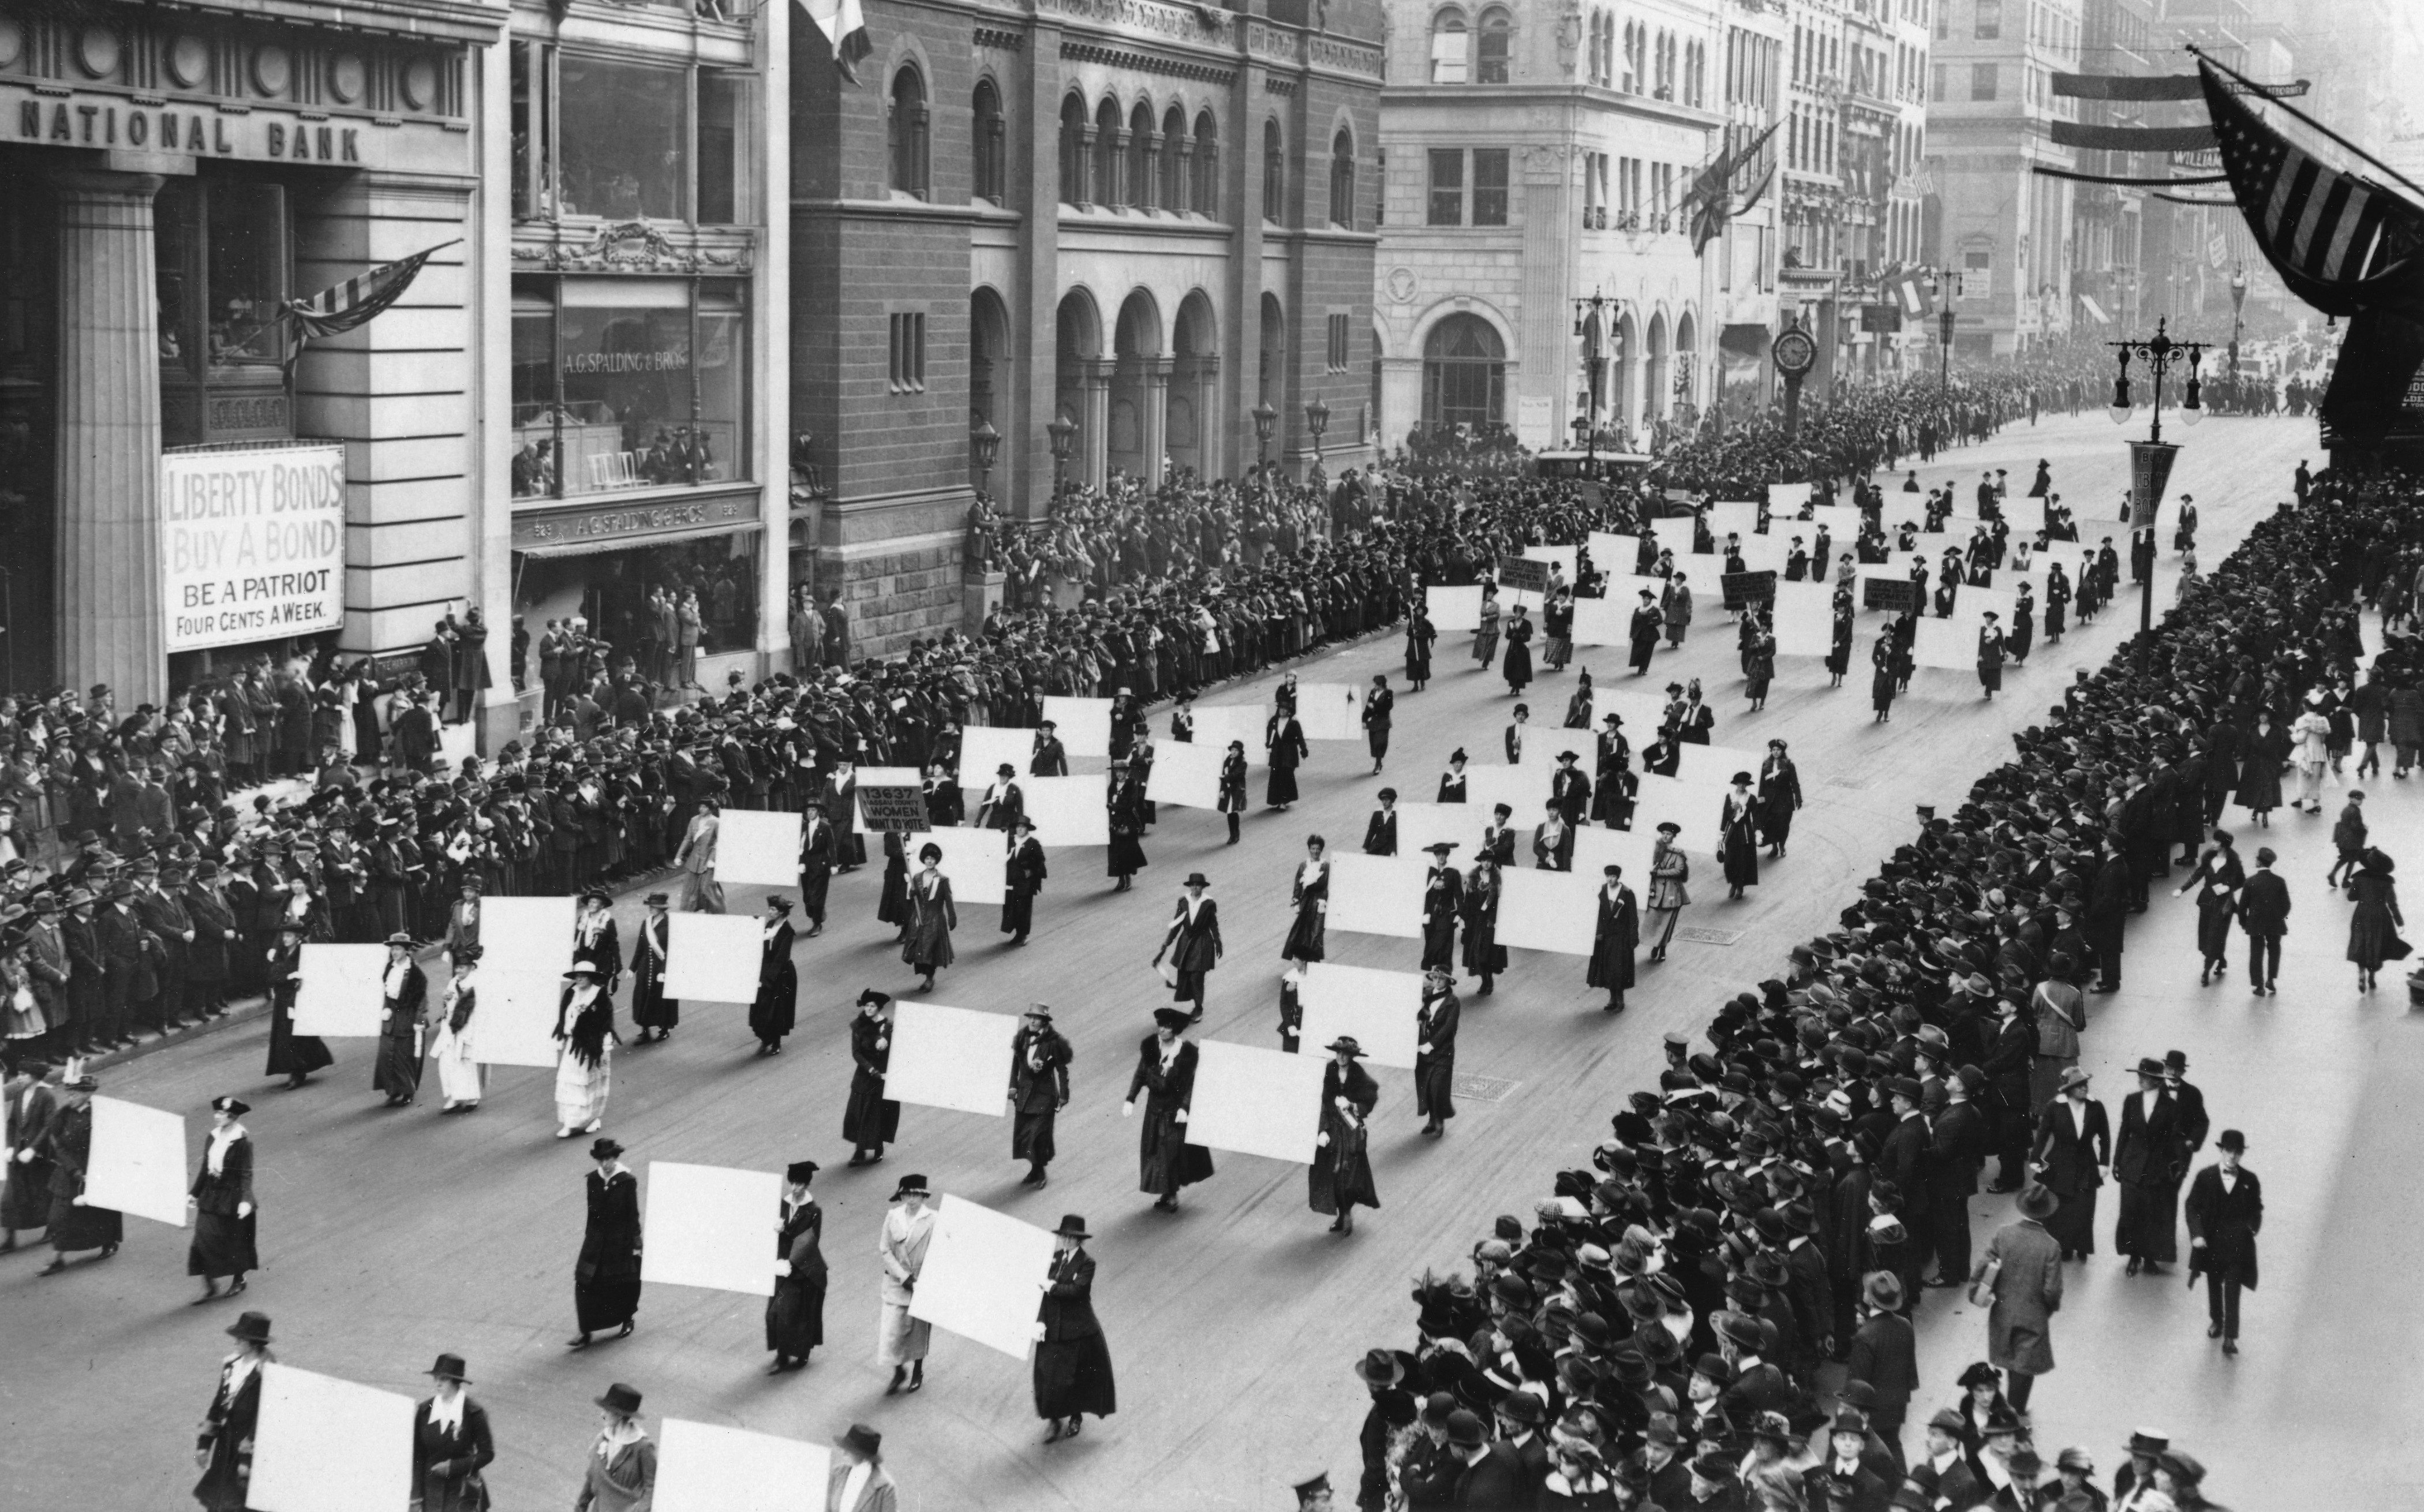 Suffragists march down Fifth Avenue, 1917 (The New York Times/Redux)